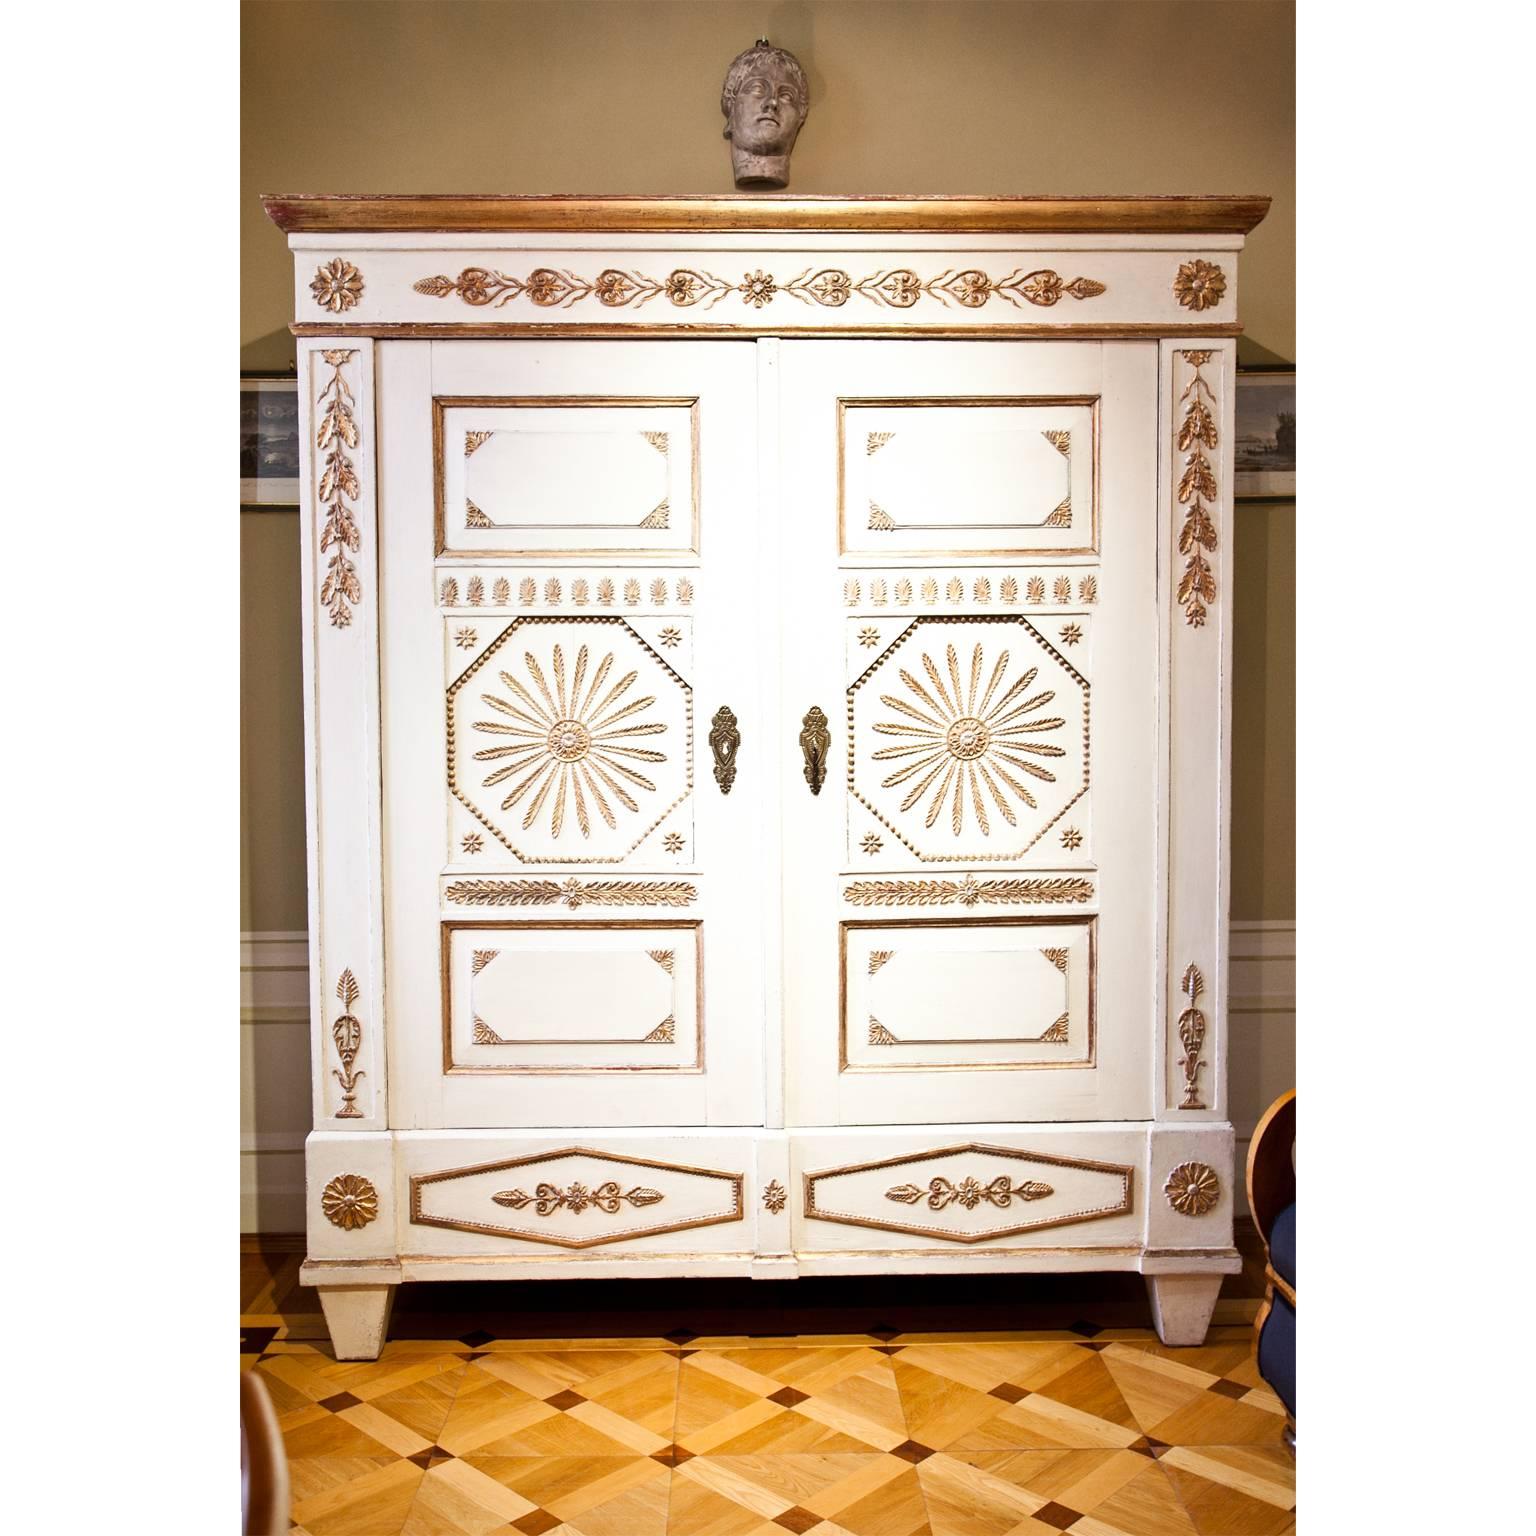 Two-door cabinet with gilt ornaments on a crème-colored base. The interior is fitted with a coat rack and shelves to the right, making it a perfect wardrobe.